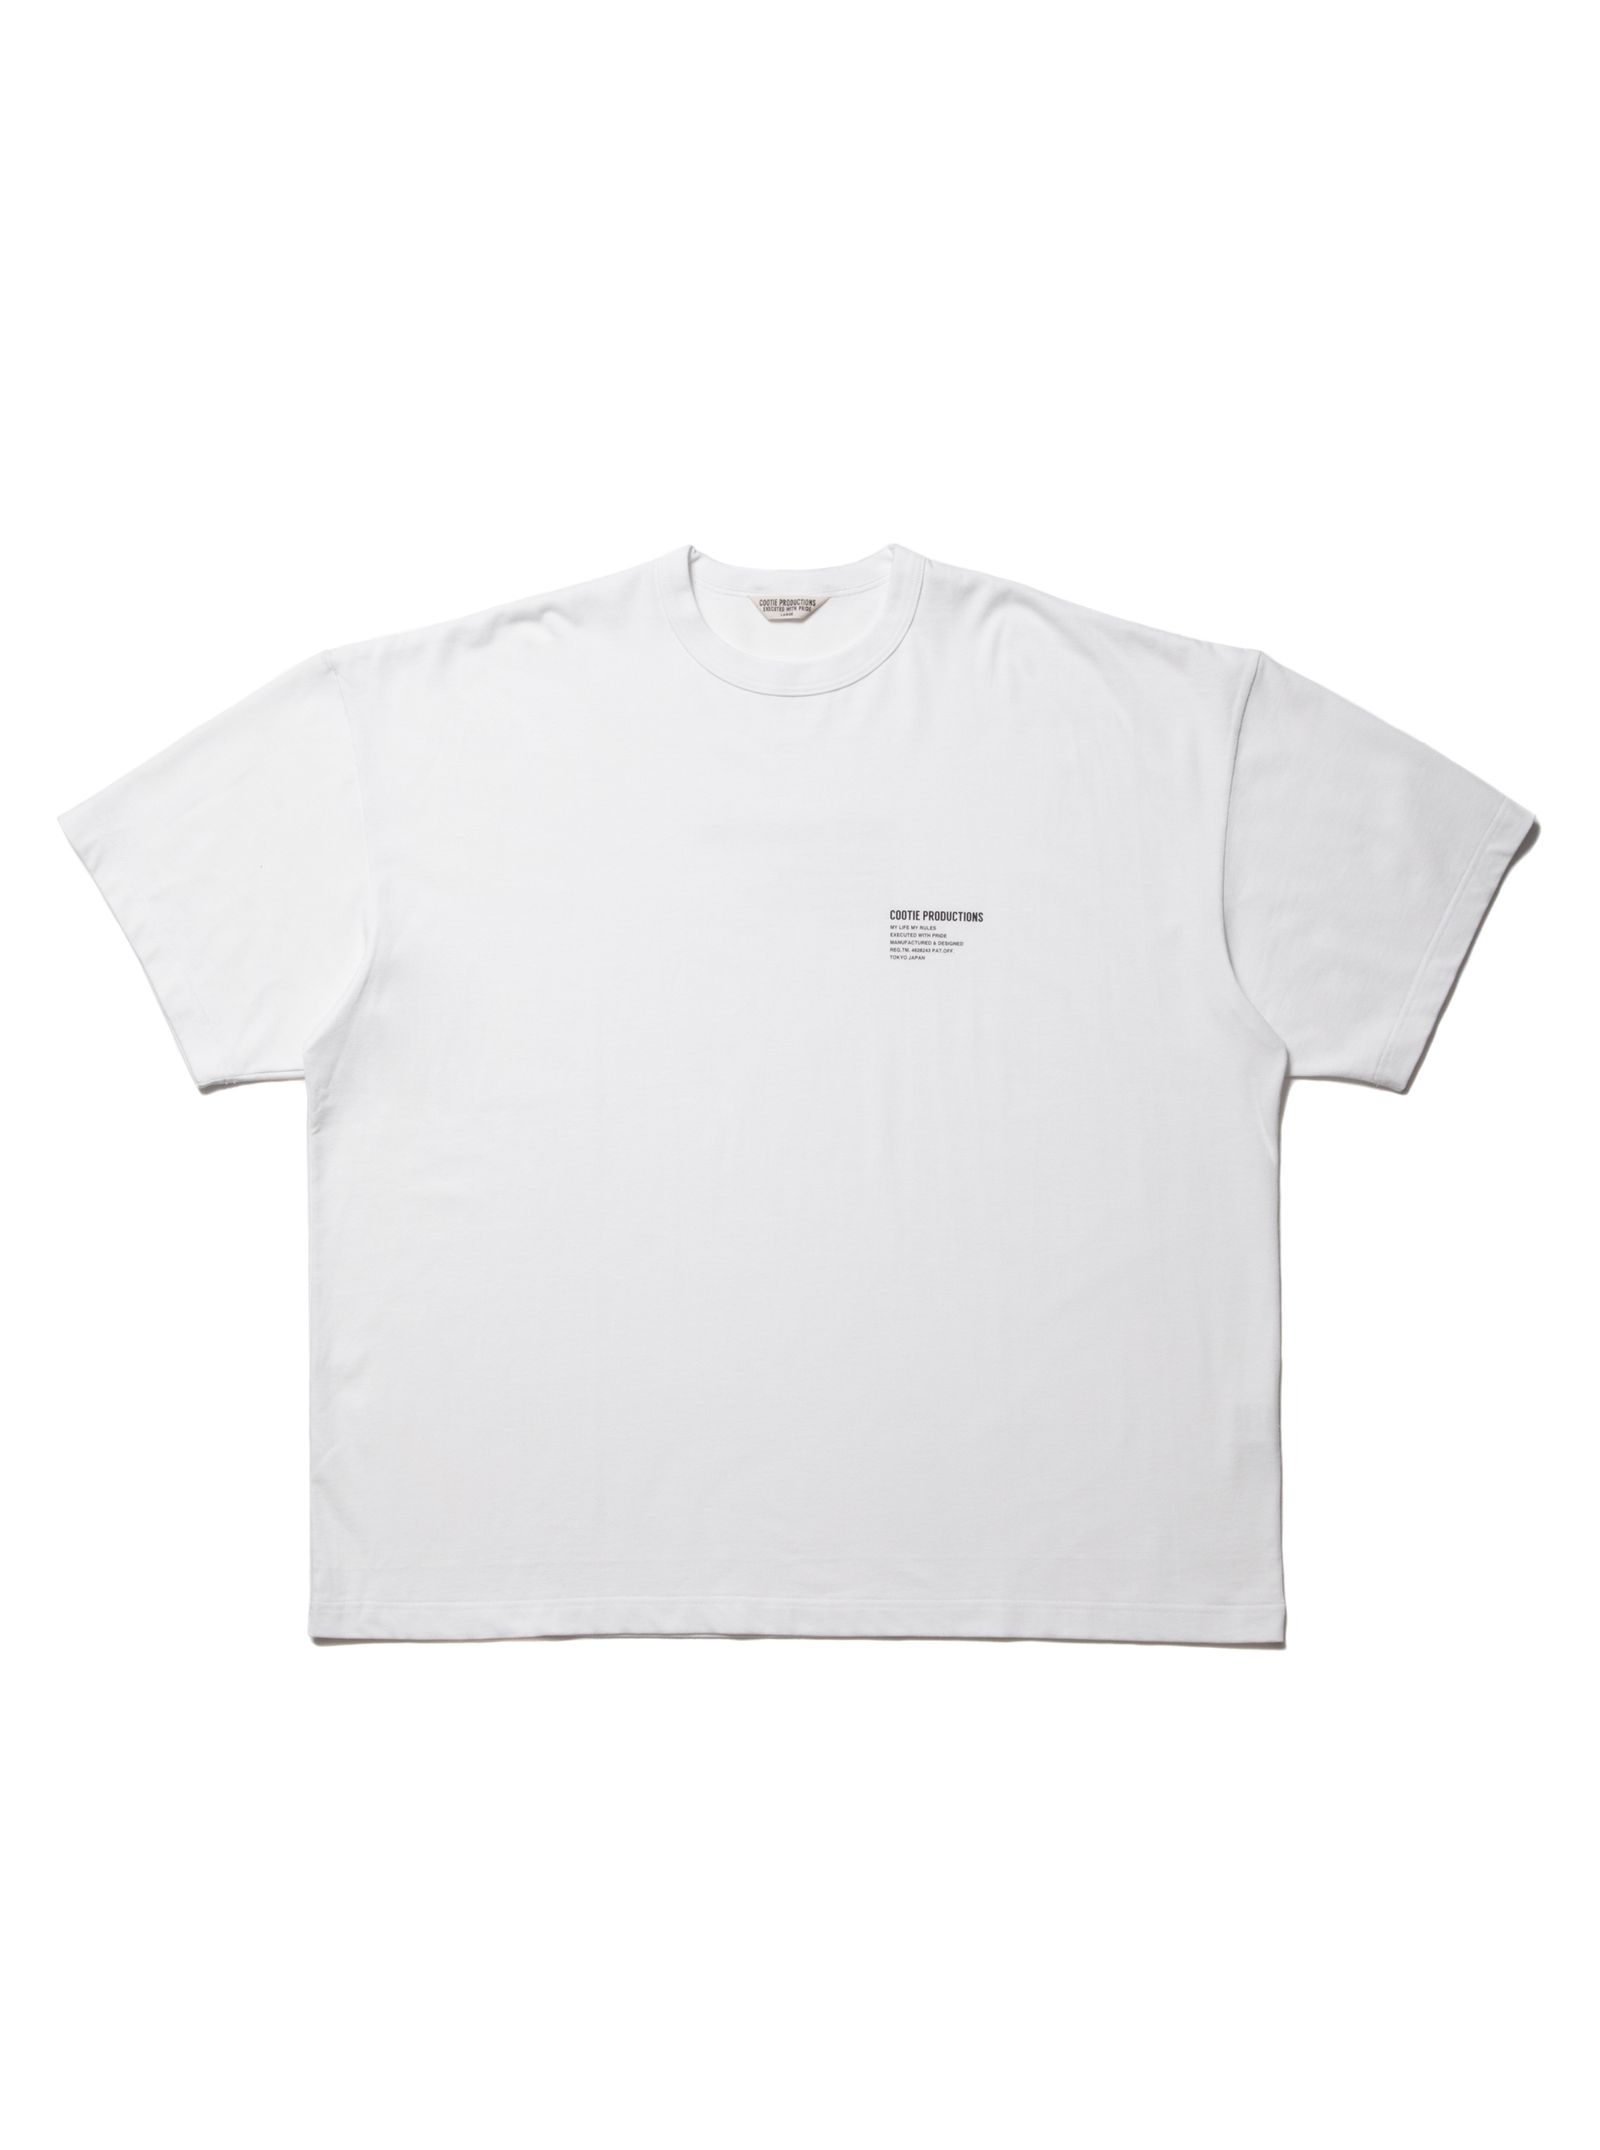 COOTIE PRODUCTIONS - C/R Smooth Jersey S/S Tee